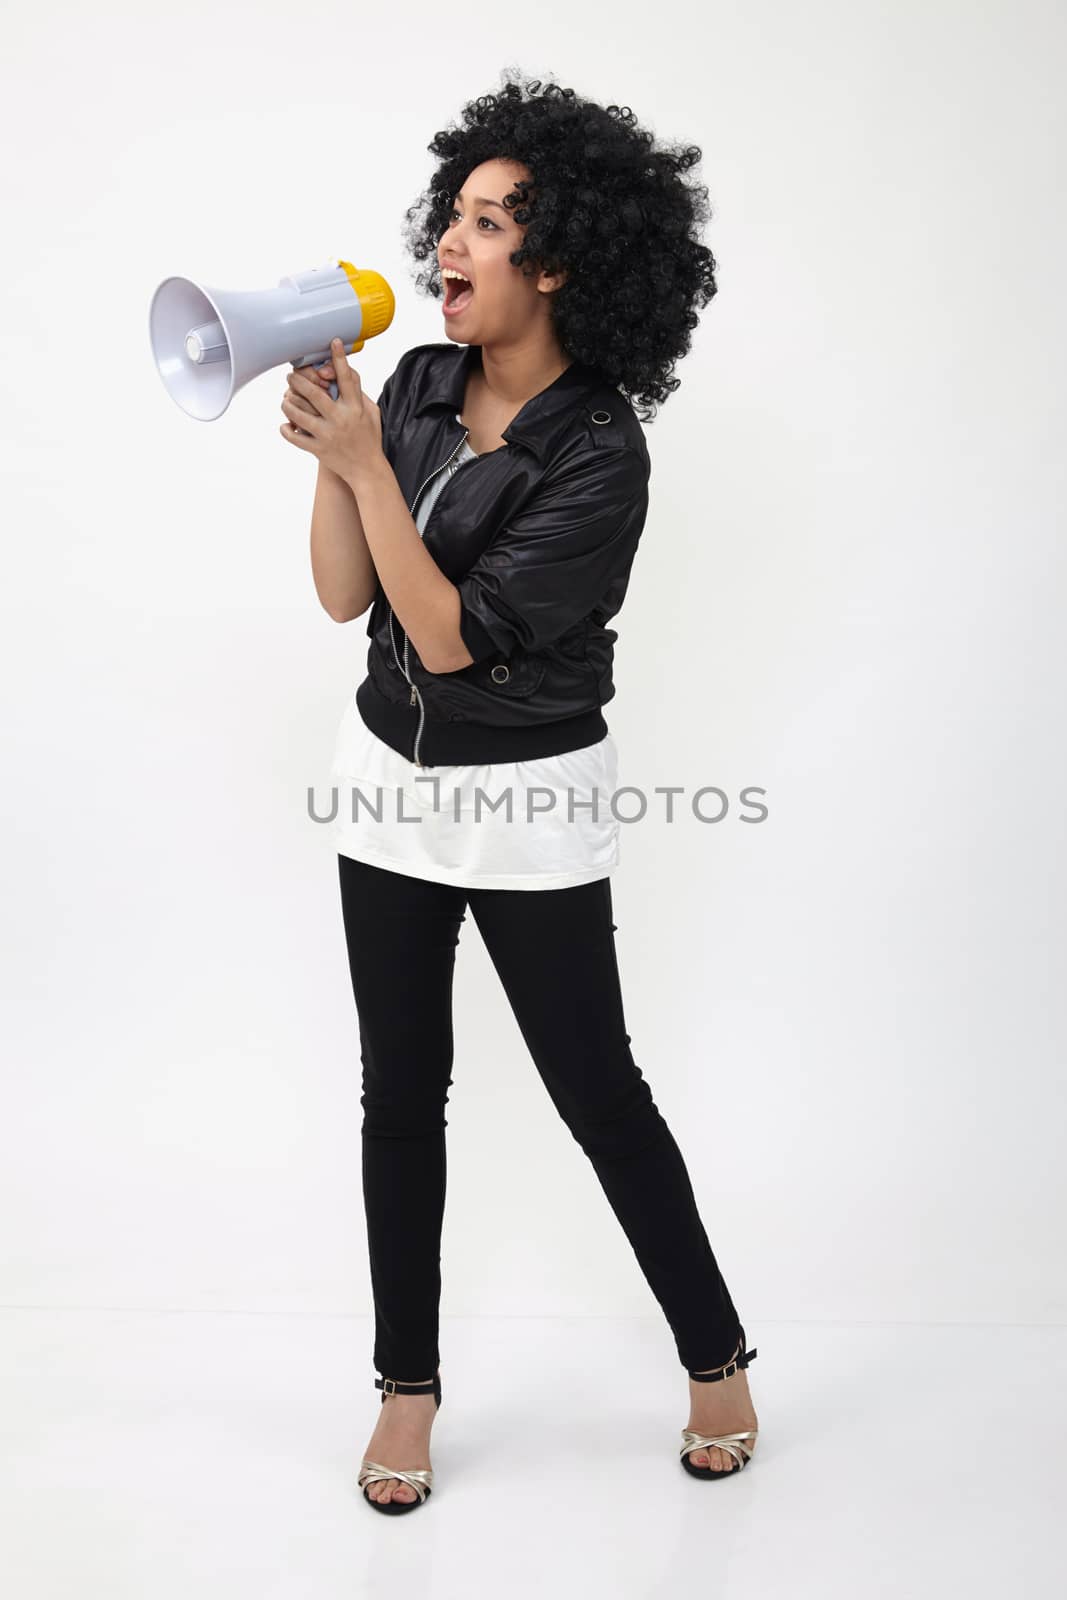 Indian teenage holding a megaphone on the white background